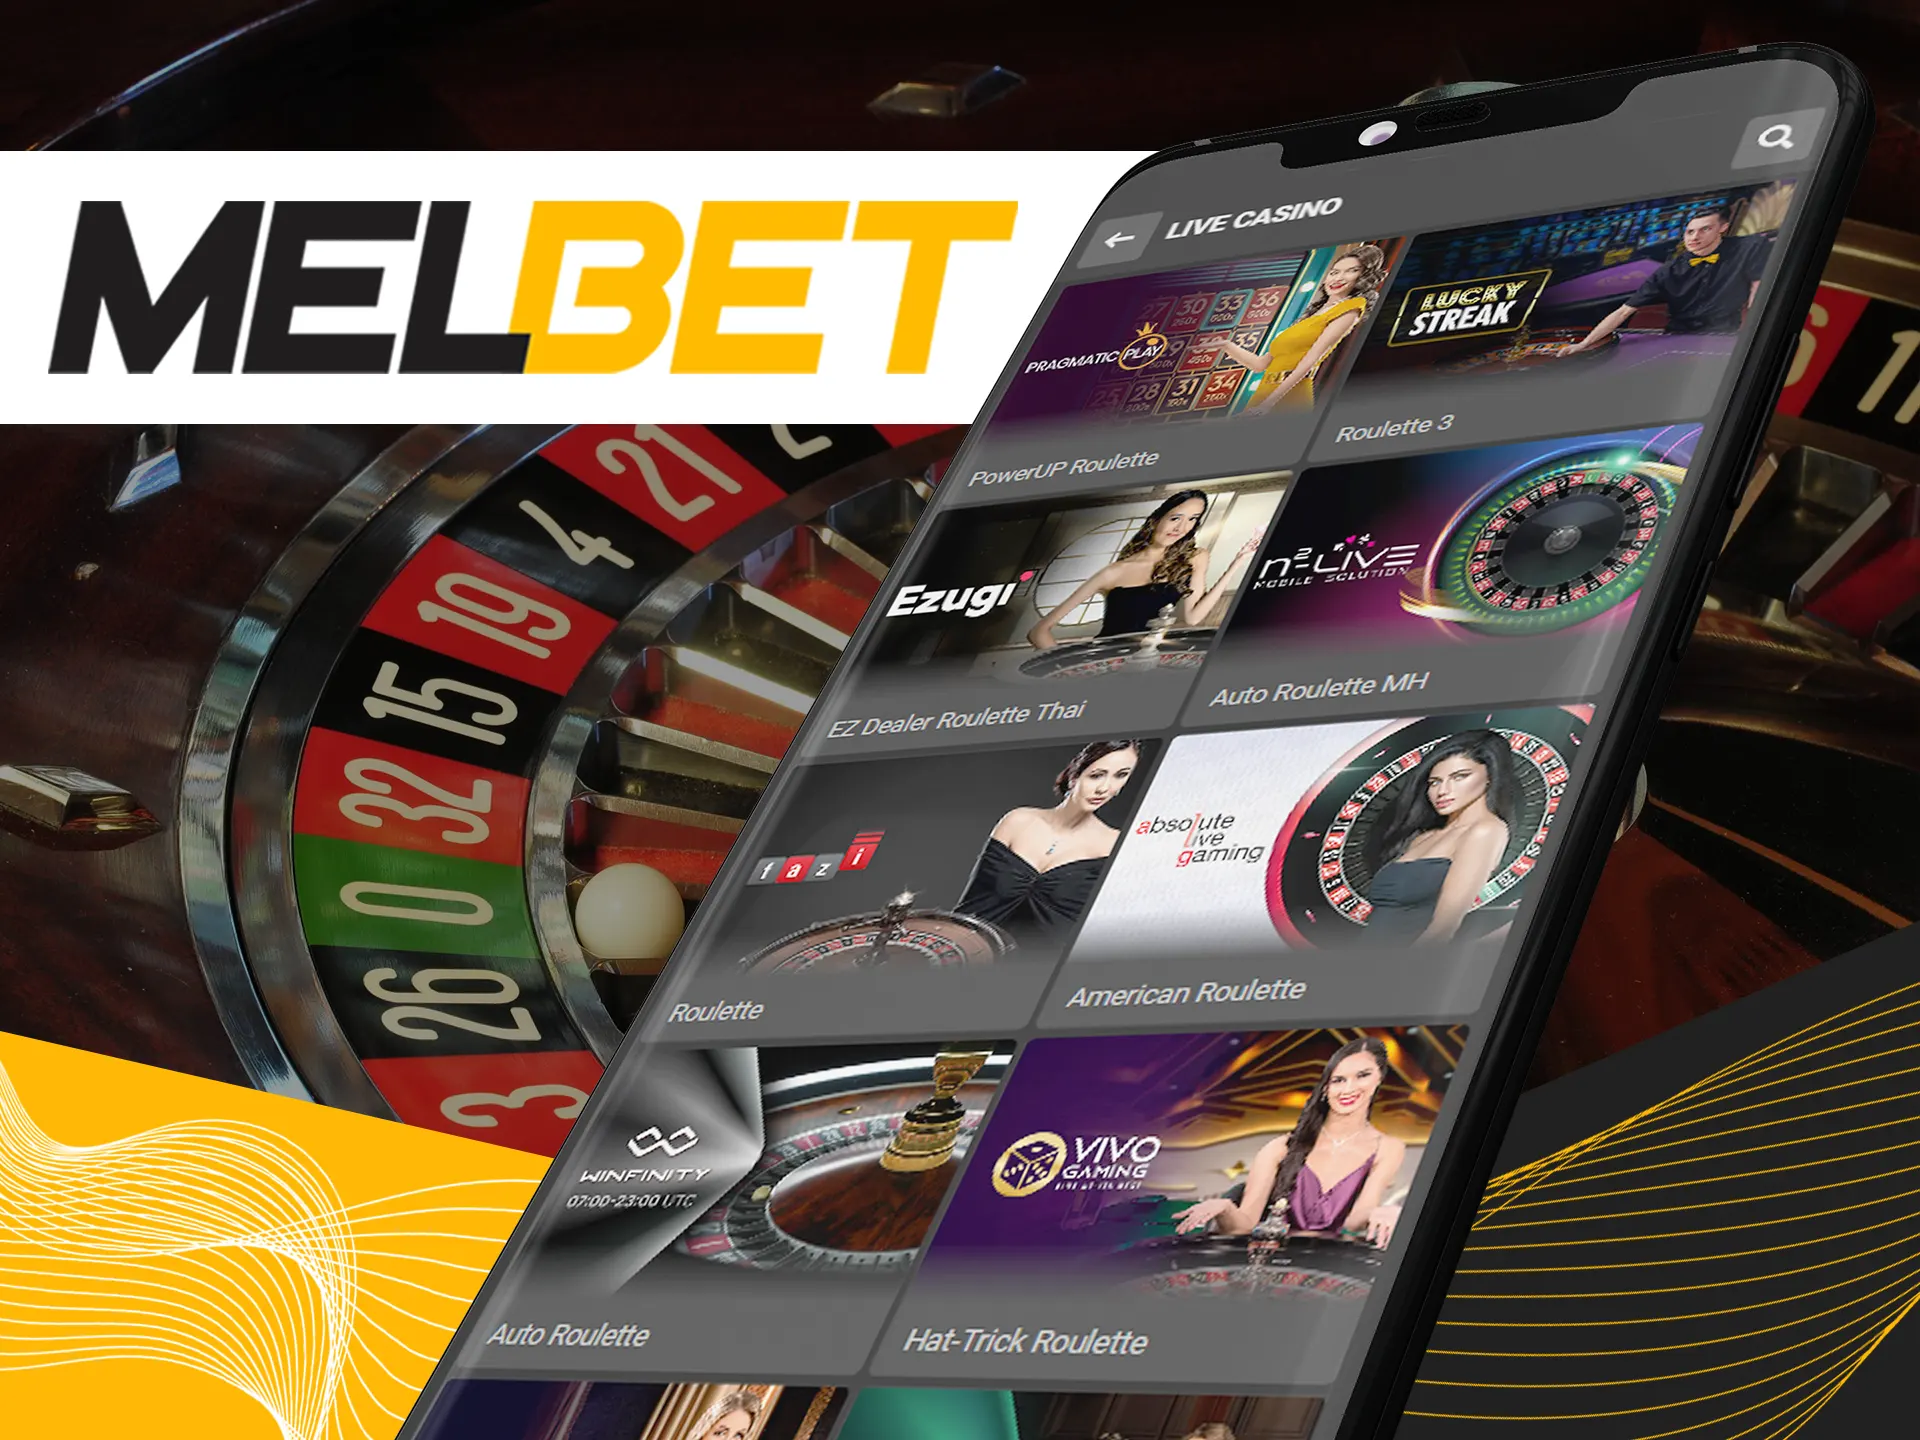 Spin roulette at Melbet and win money.